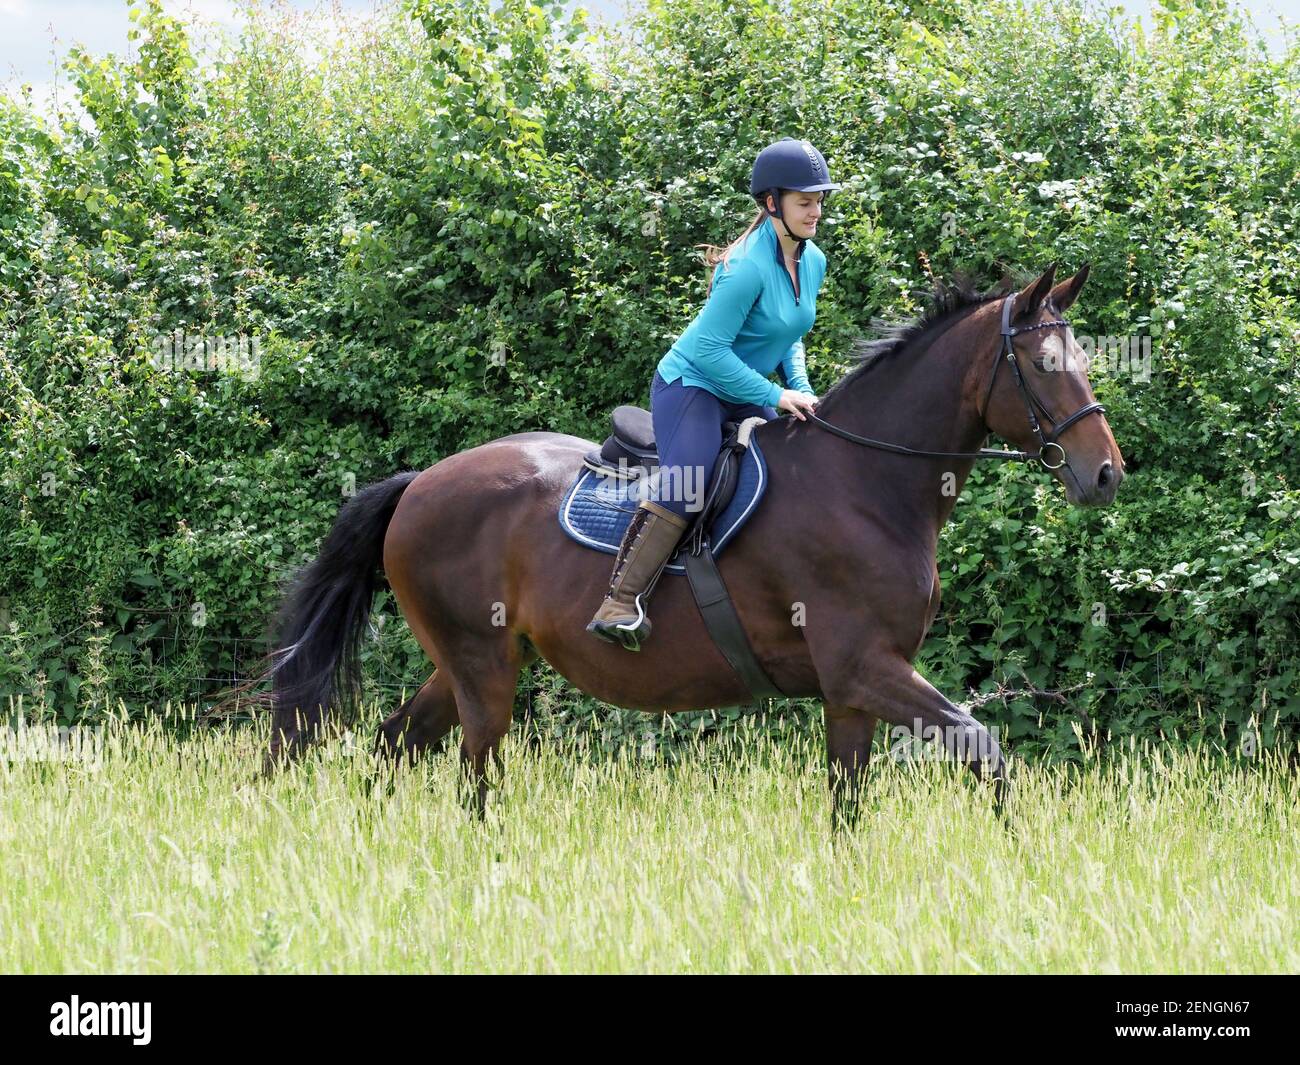 A lady hacks her bay horse through a grass meadow. Stock Photo